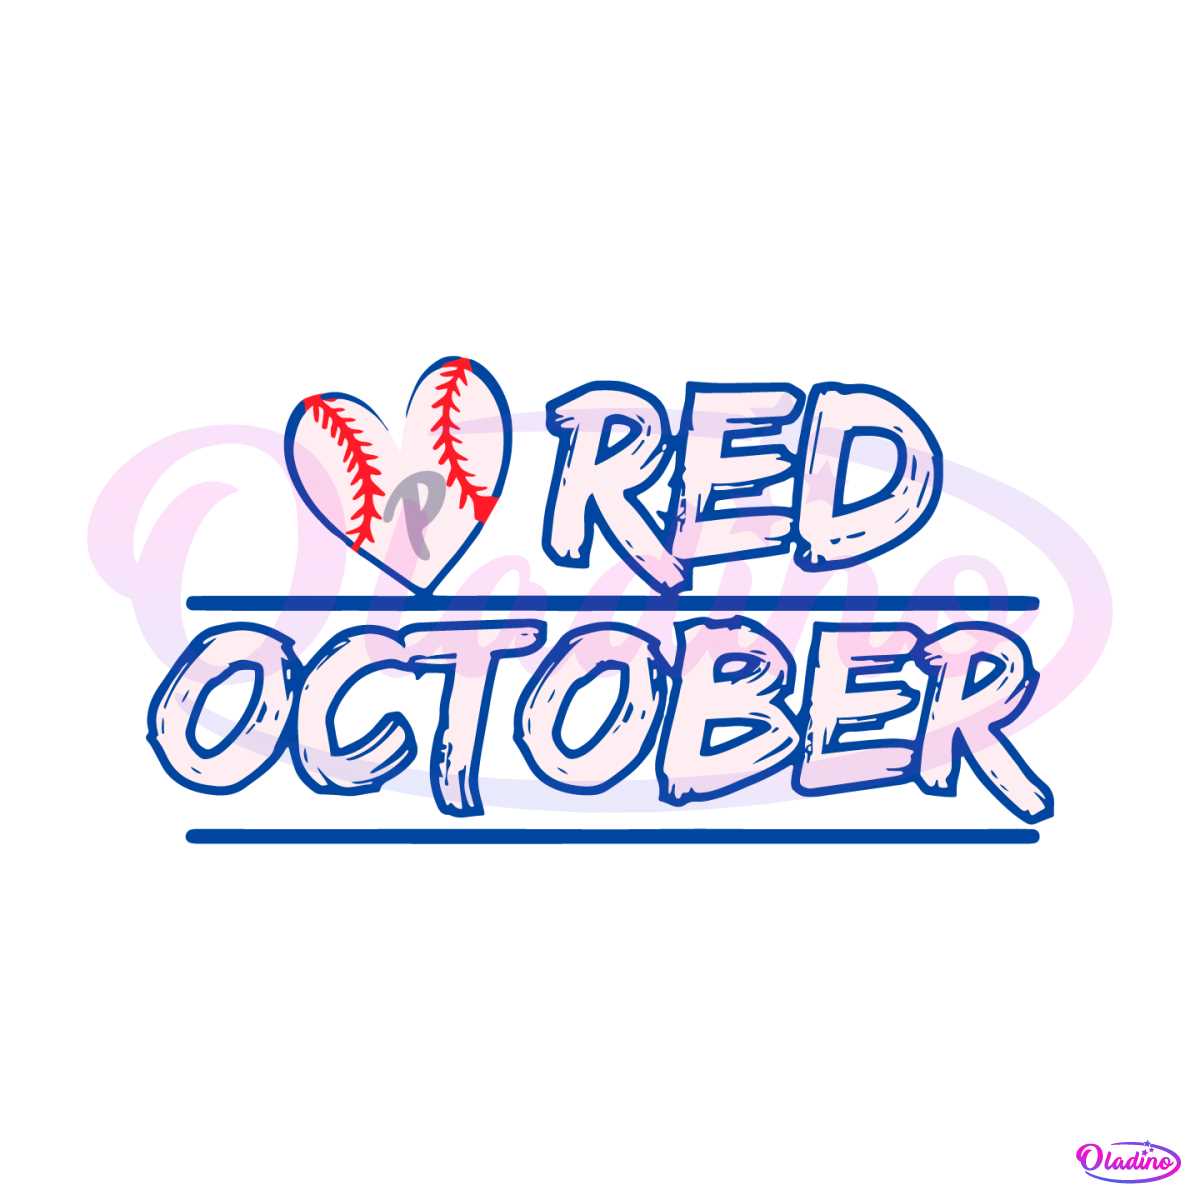 red october phillies